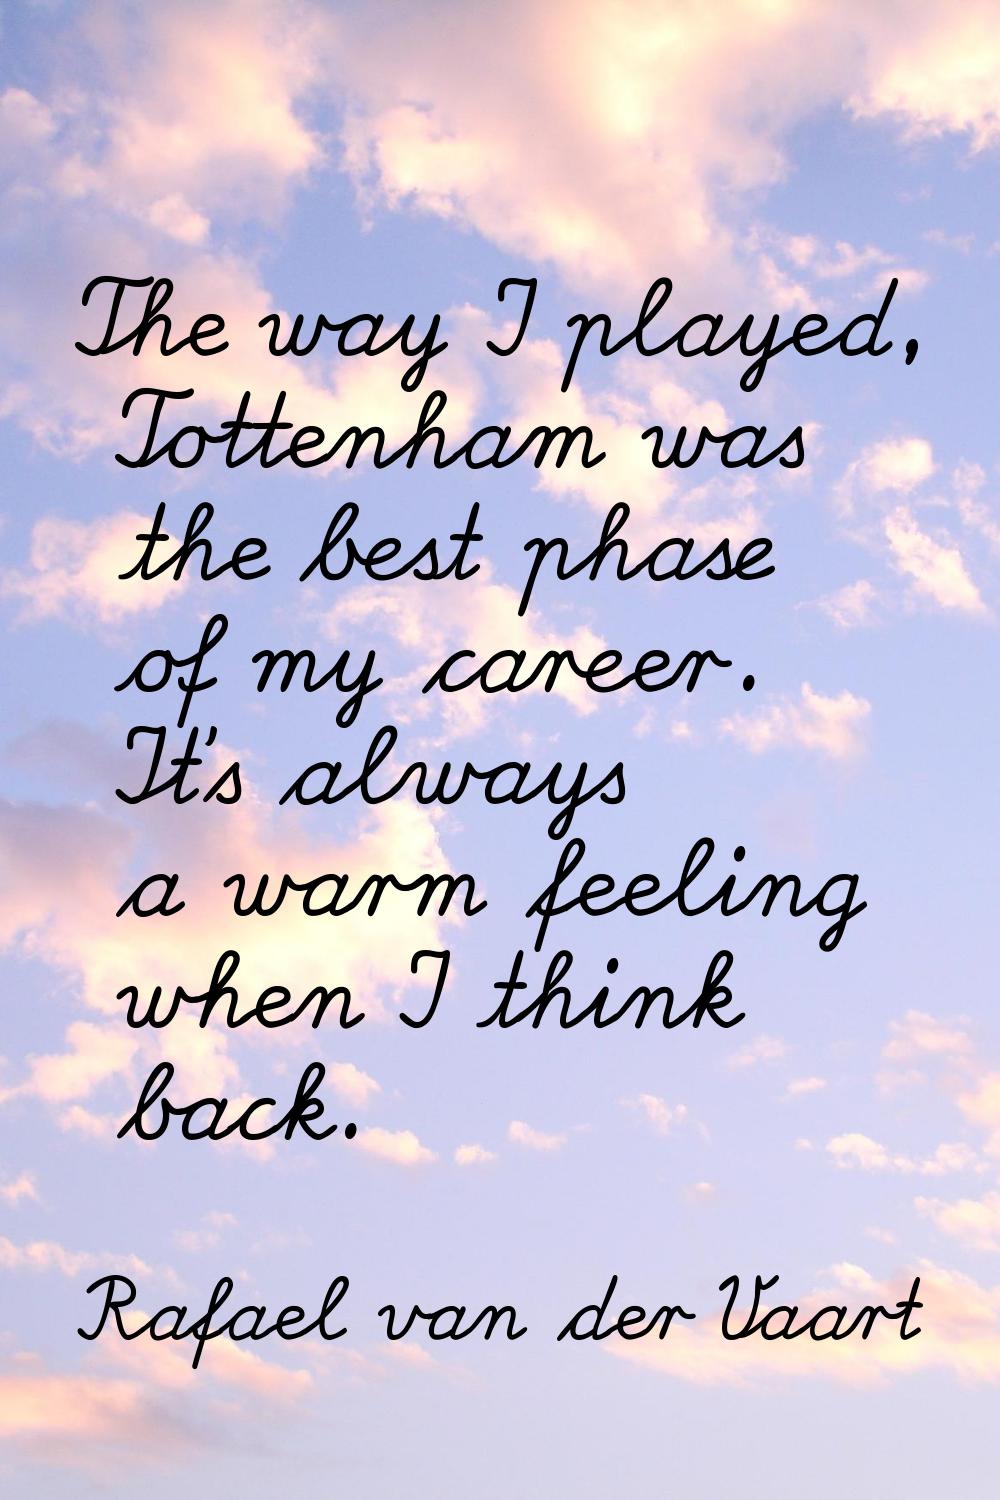 The way I played, Tottenham was the best phase of my career. It's always a warm feeling when I thin